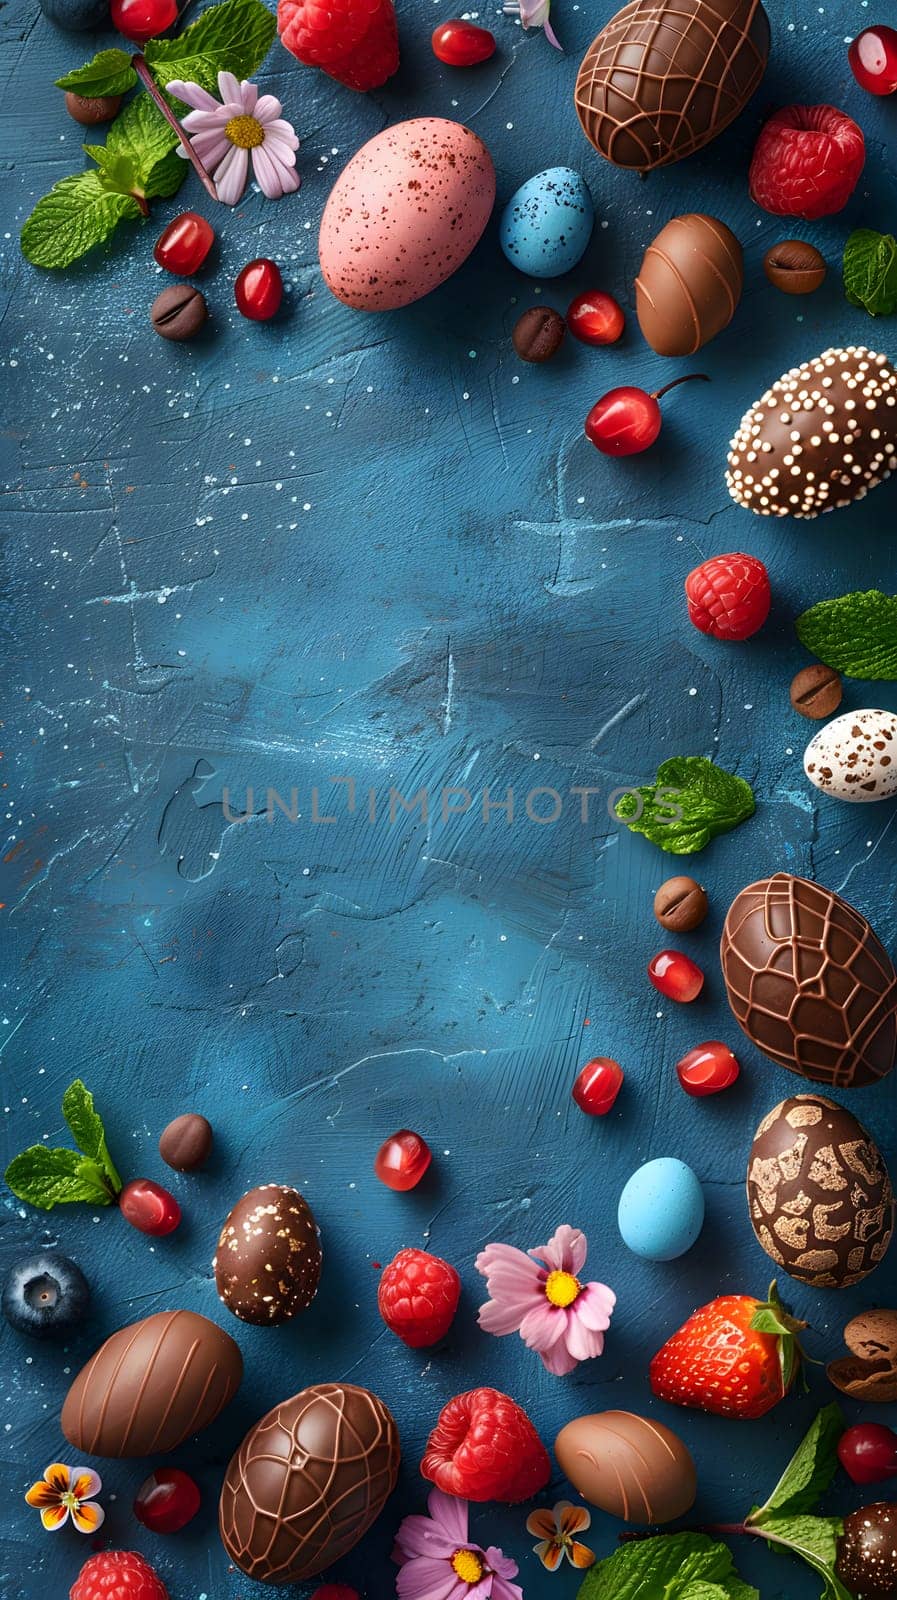 The table is decorated with various types of chocolate eggs, berries, and Christmas ornaments in green, blue, and red. A creative arts event showcasing natural foods and woody plants